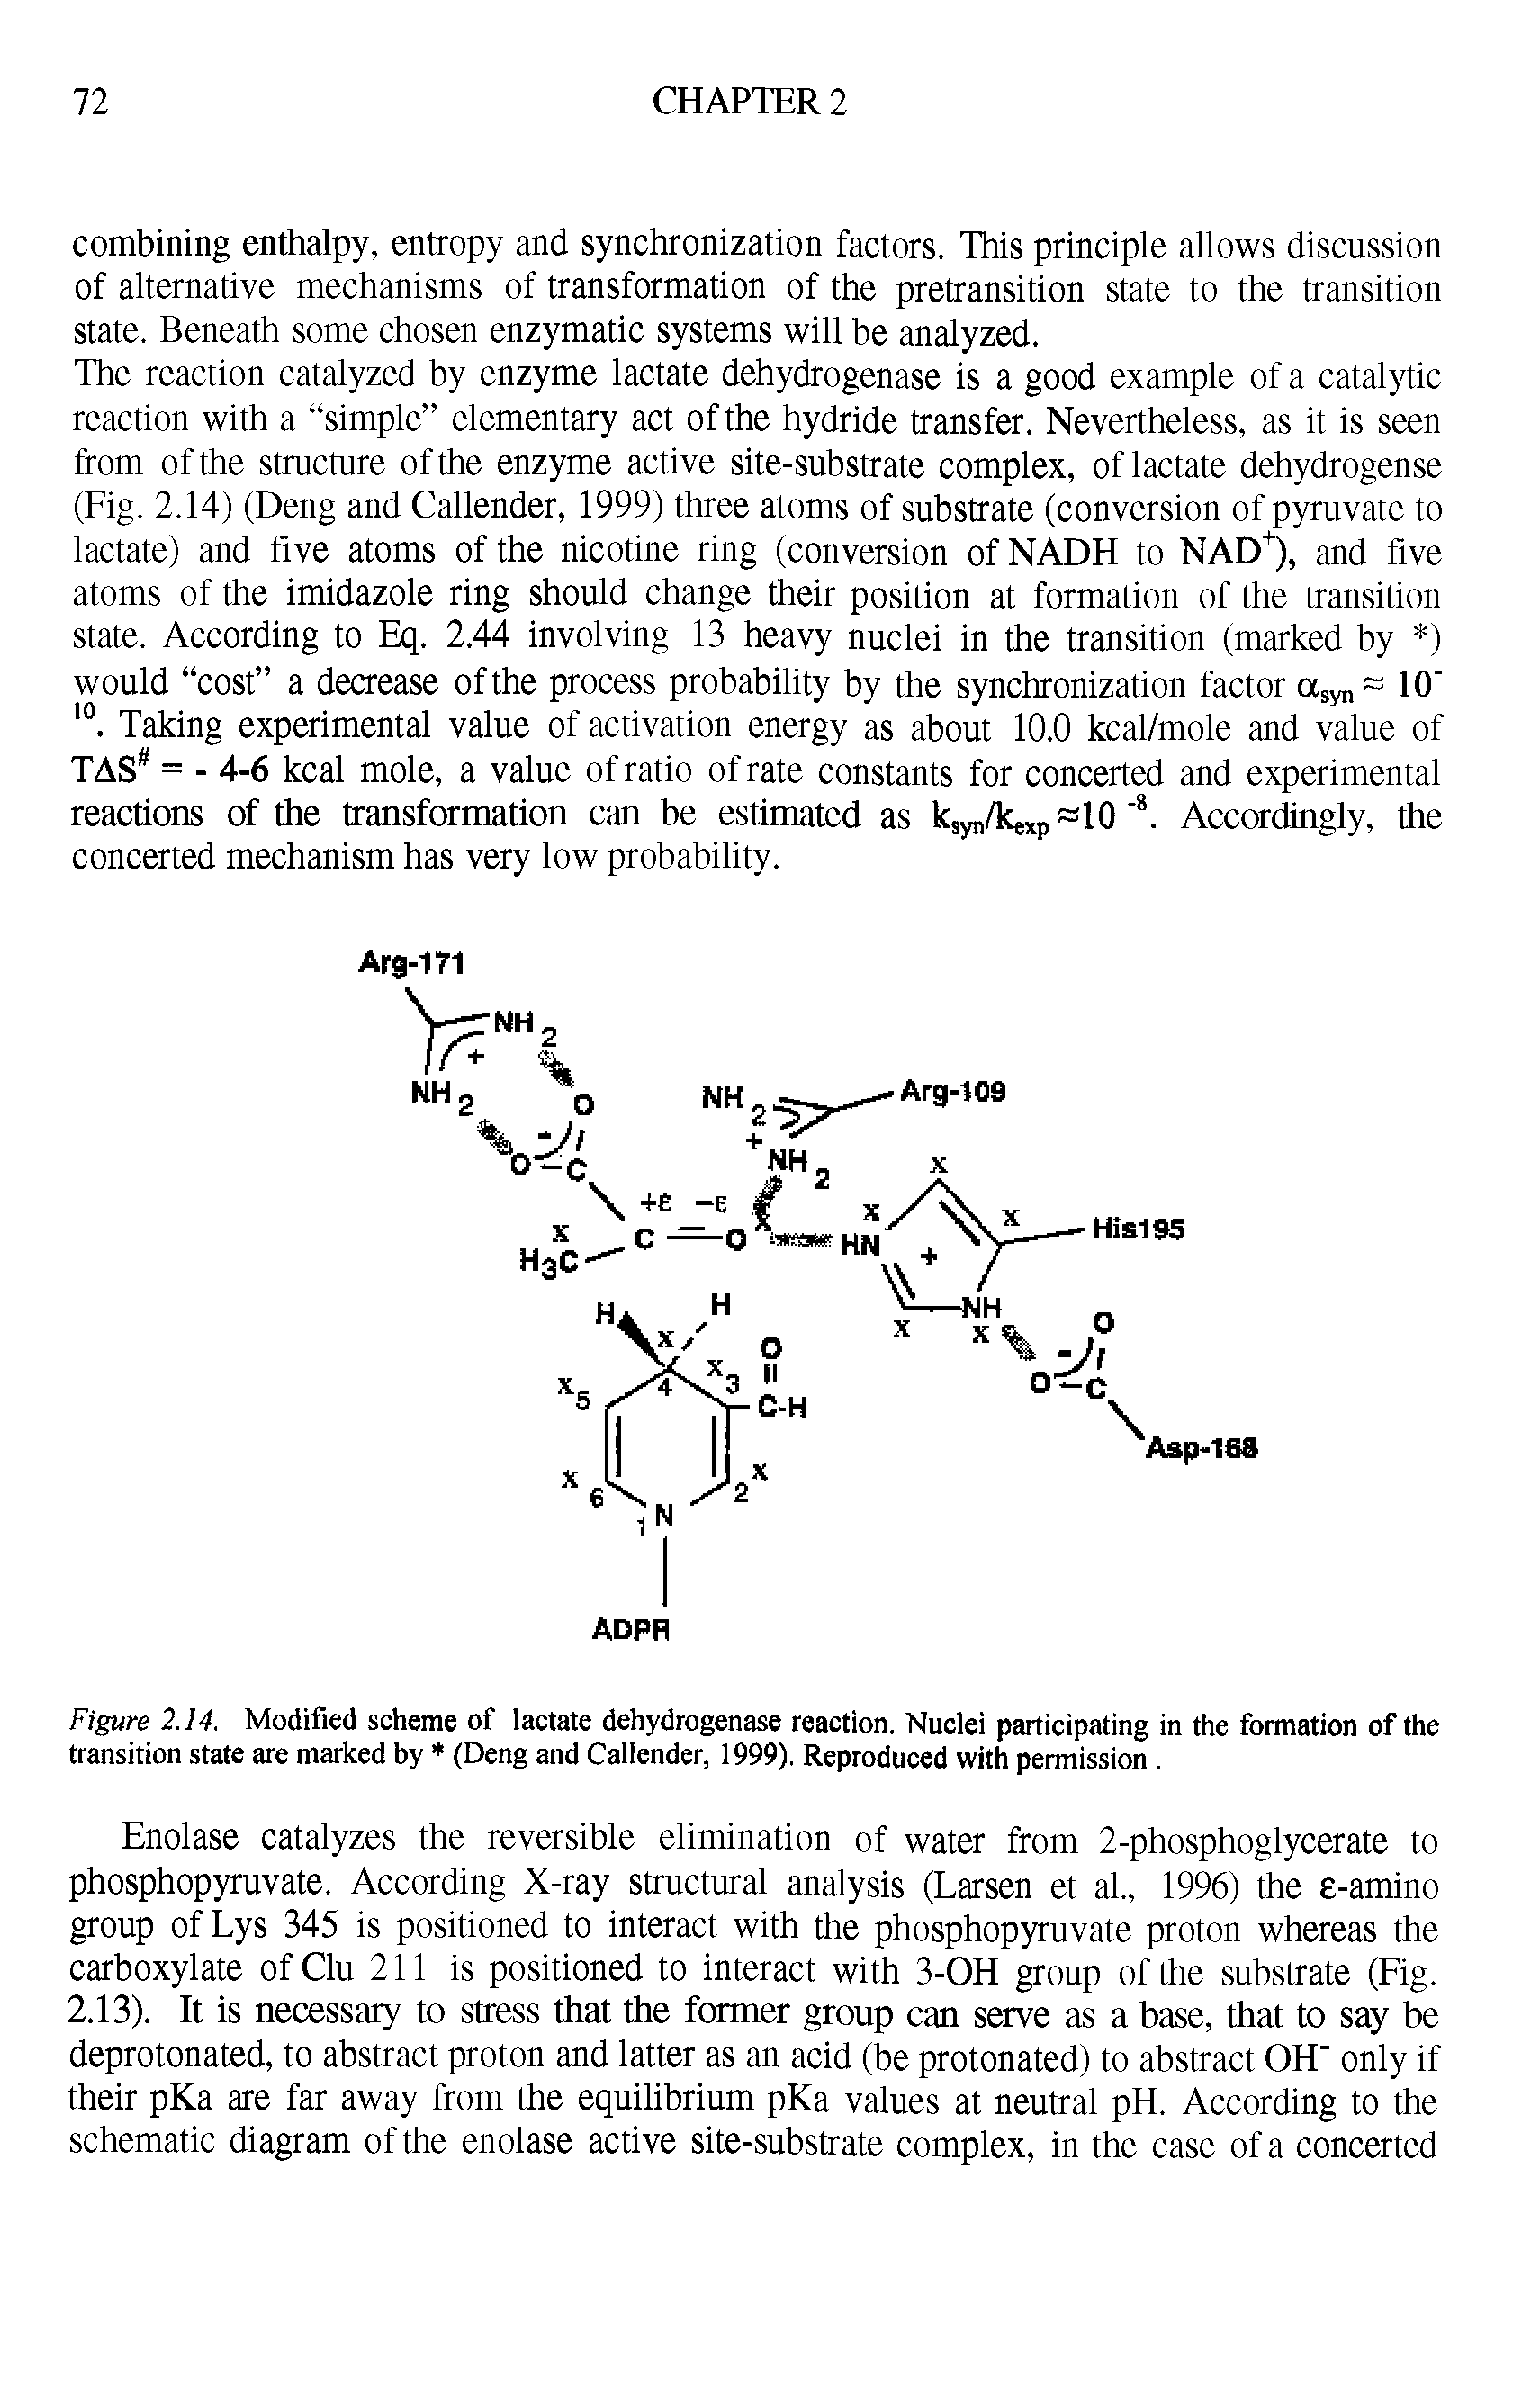 Figure 2.14. Modified scheme of lactate dehydrogenase reaction. Nuclei participating in the formation of the transition state are marked by (Deng and Callender, 1999). Reproduced with permission. ...